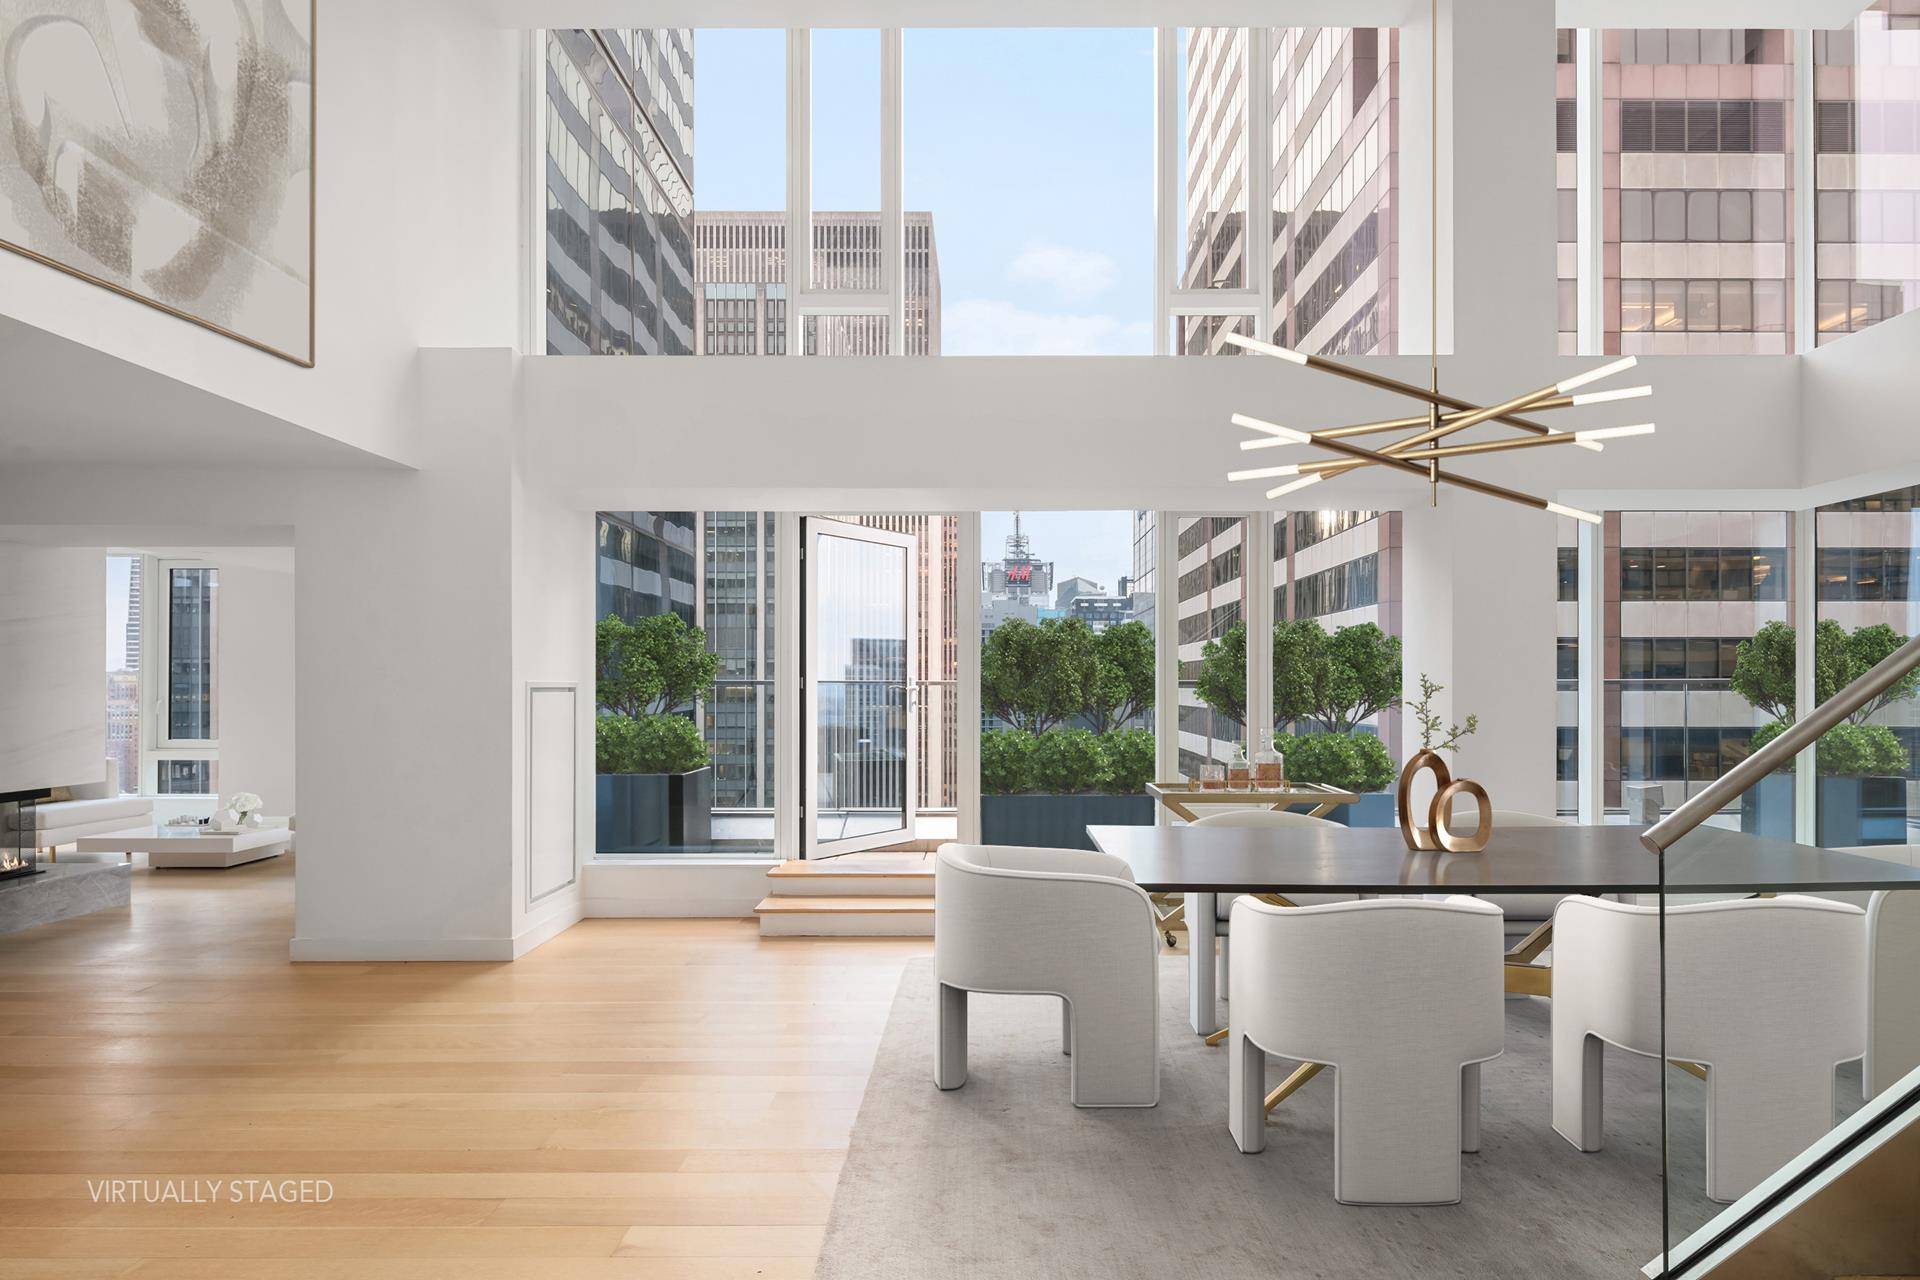 Perched 41 stories above Midtown sits this magnificent, ultra luxurious 5 bedroom, 4.